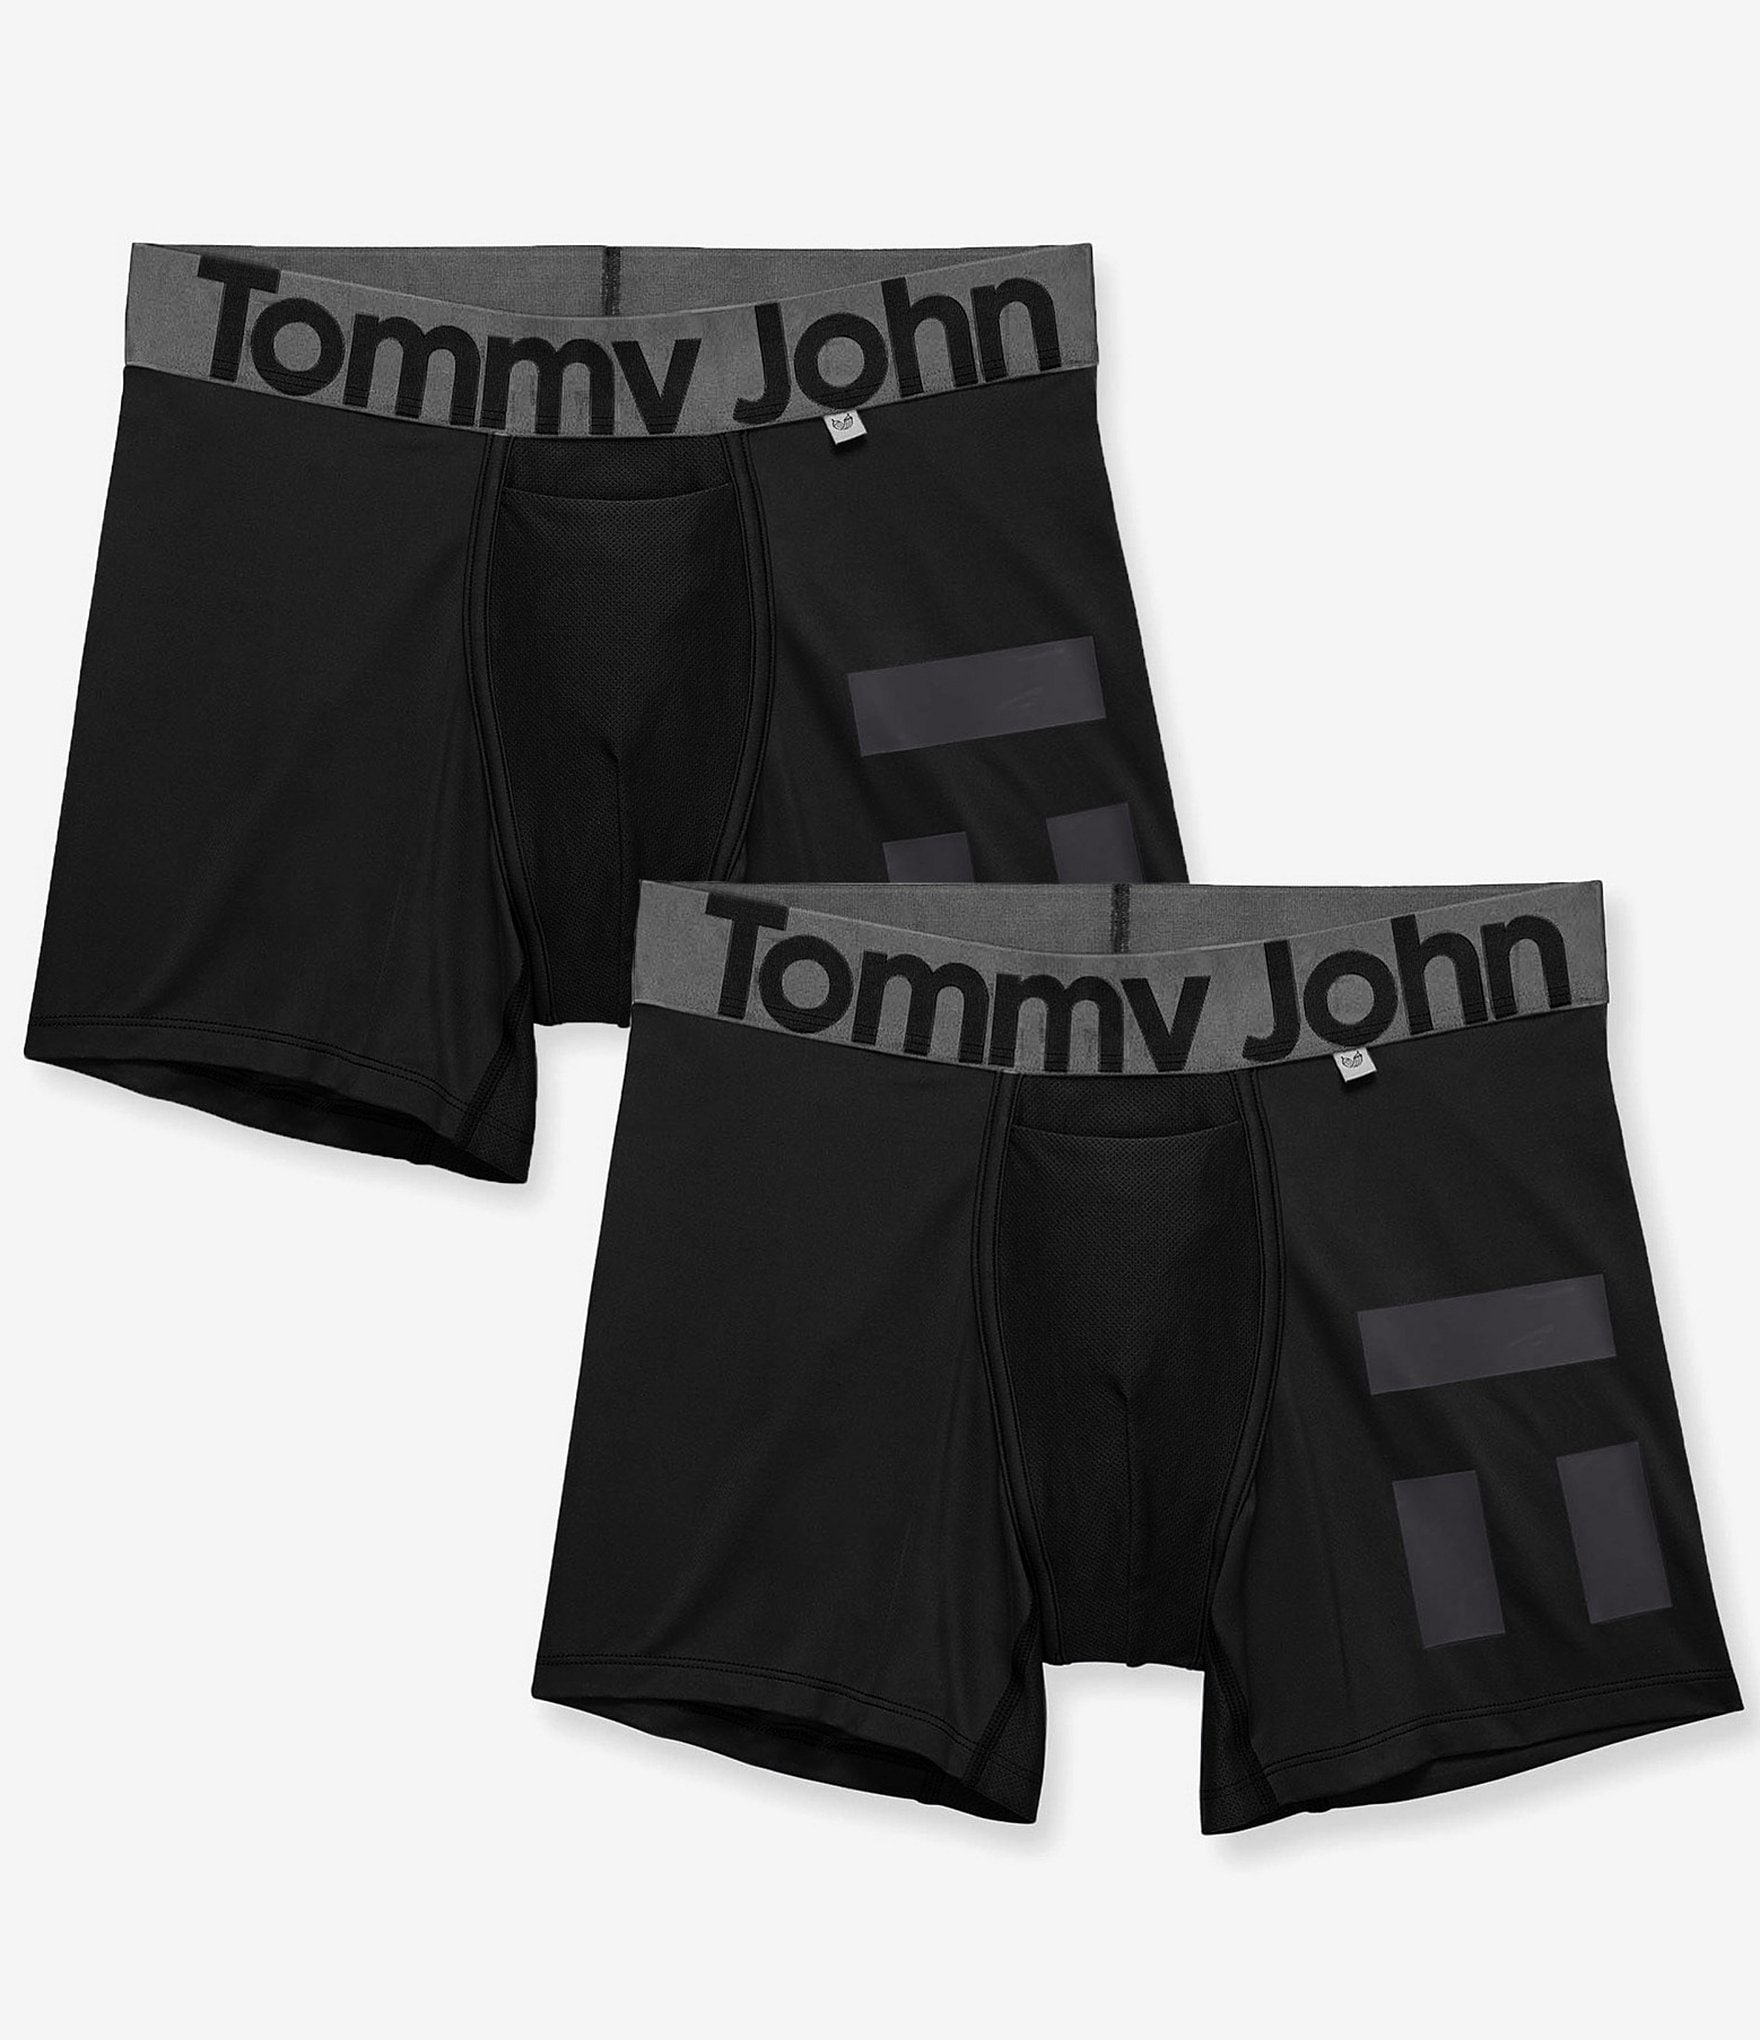 Tommy John Men's Underwear, Boxer Briefs, Second Skin Fabric Trunk with 4  Inseam, Black - 3 Pack, XXL: Buy Online at Best Price in Egypt - Souq is  now